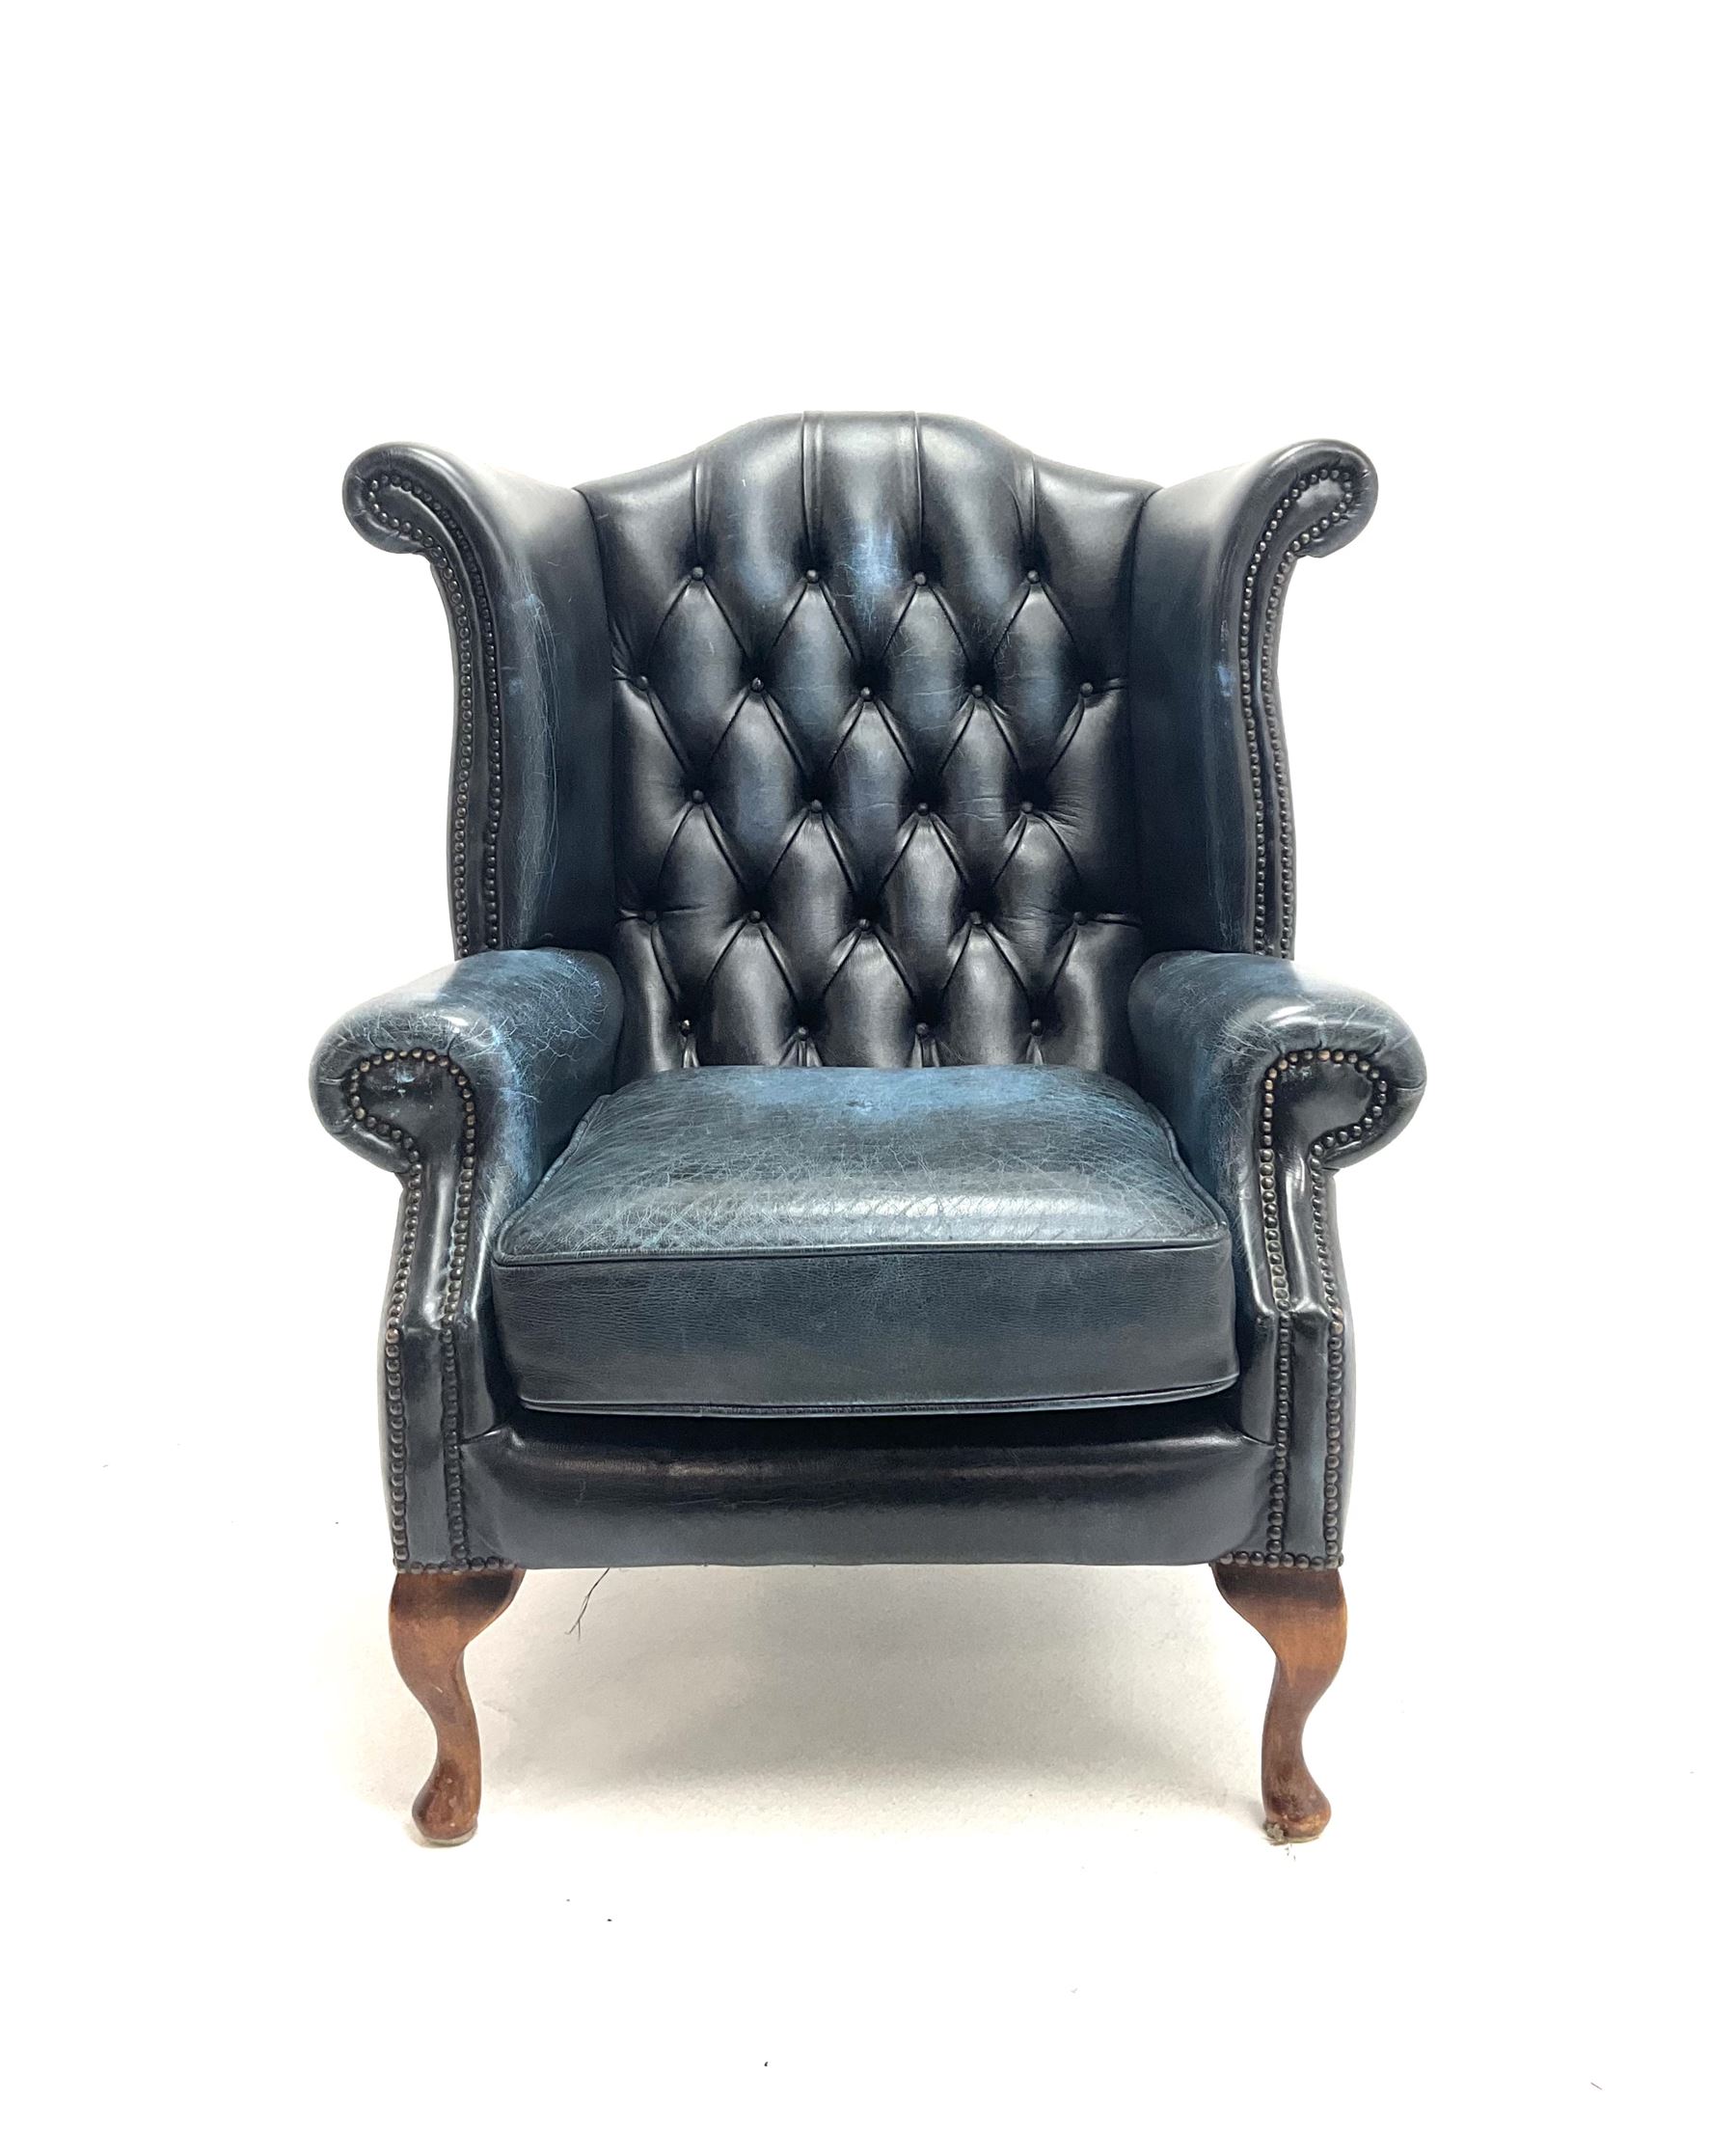 Queen Anne style wing back deep button armchair